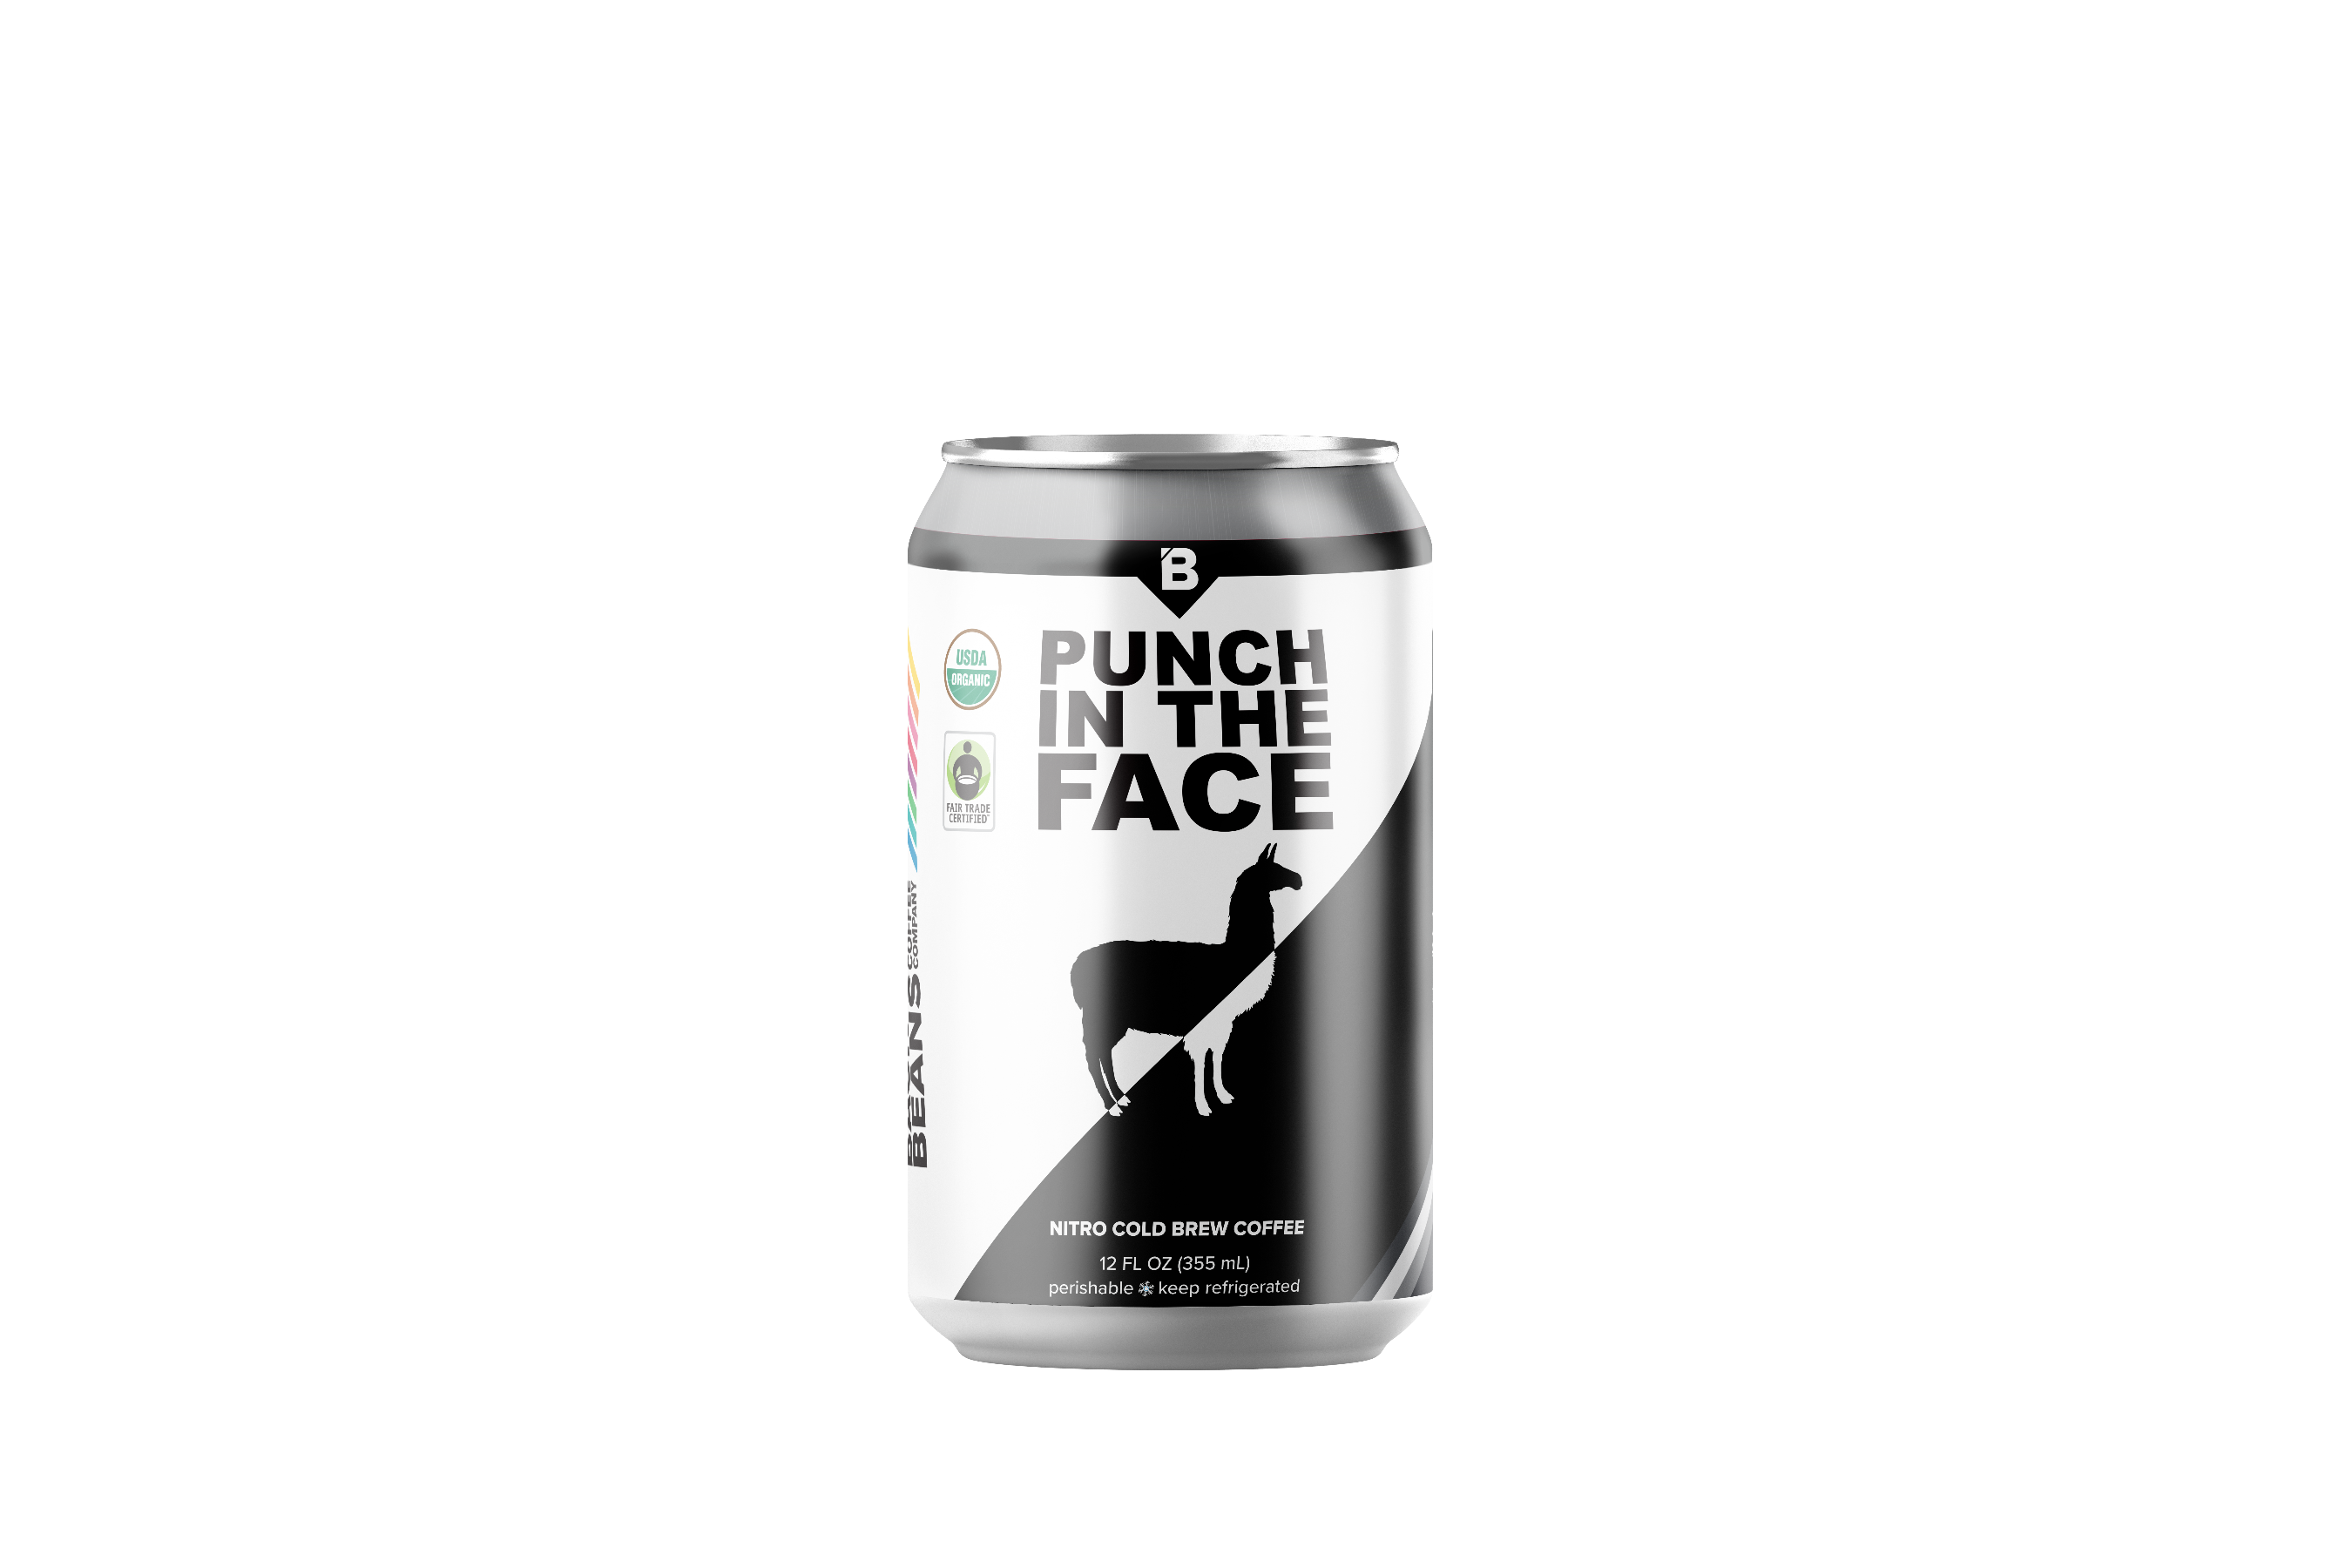 Image of Punch in the Face can.